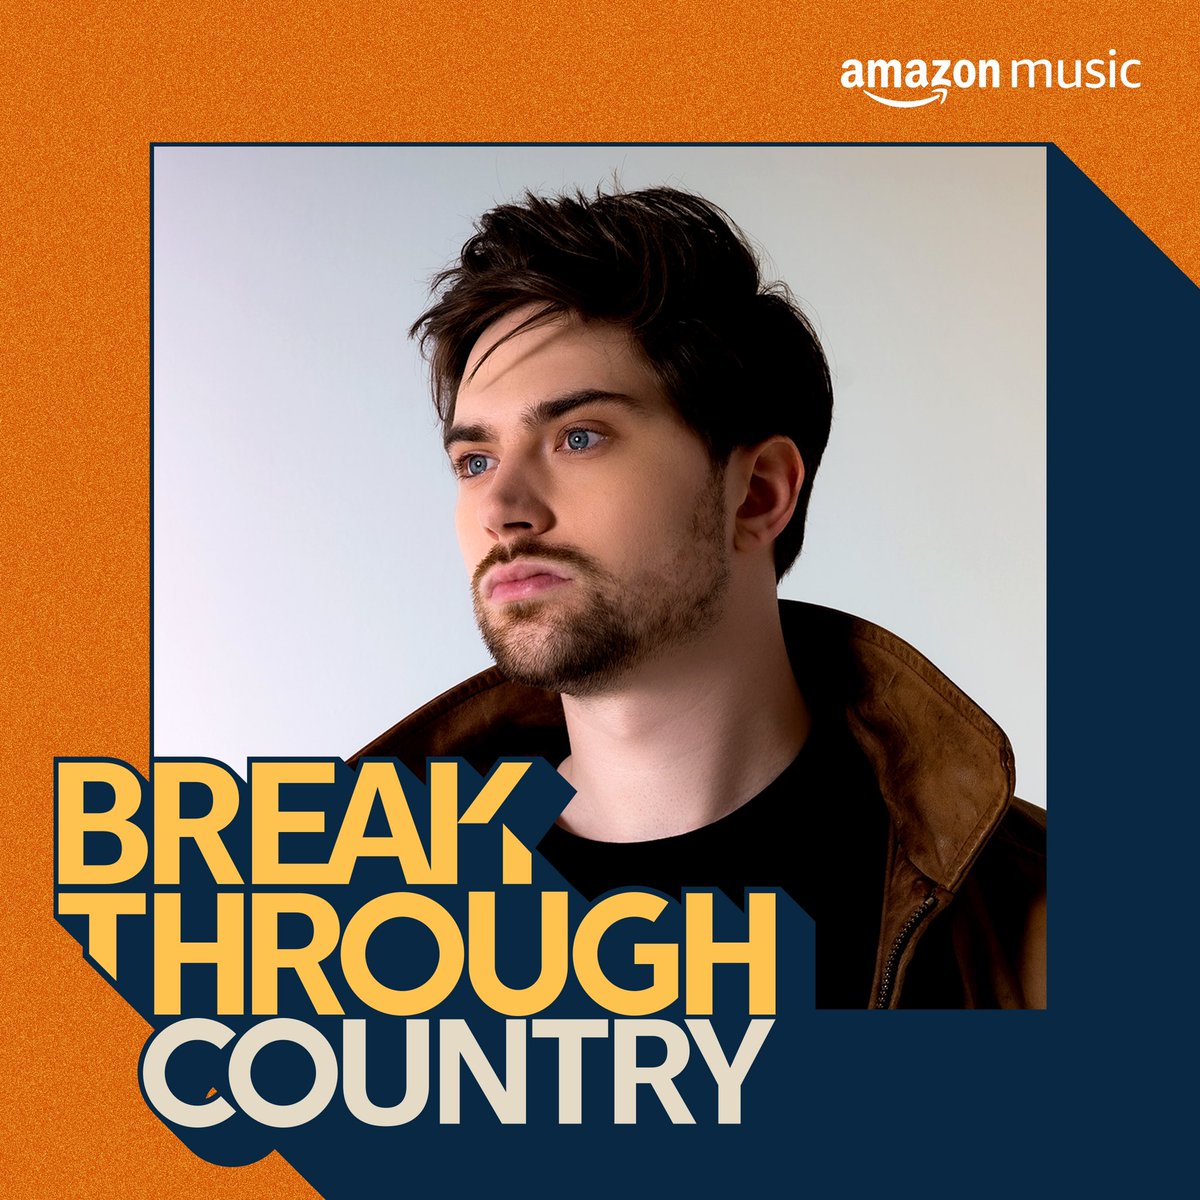 Alexa, play #HatingOnLove by #DustinBird 🎶🖤 Listen: amzn.to/3dLeR0E

Huge thank you to @amazonmusic for the amazing support- I'm on the cover of #BreakthroughCountry this week! It feels amazing to be getting this song and message out there. #AmazonMusic #Alexa